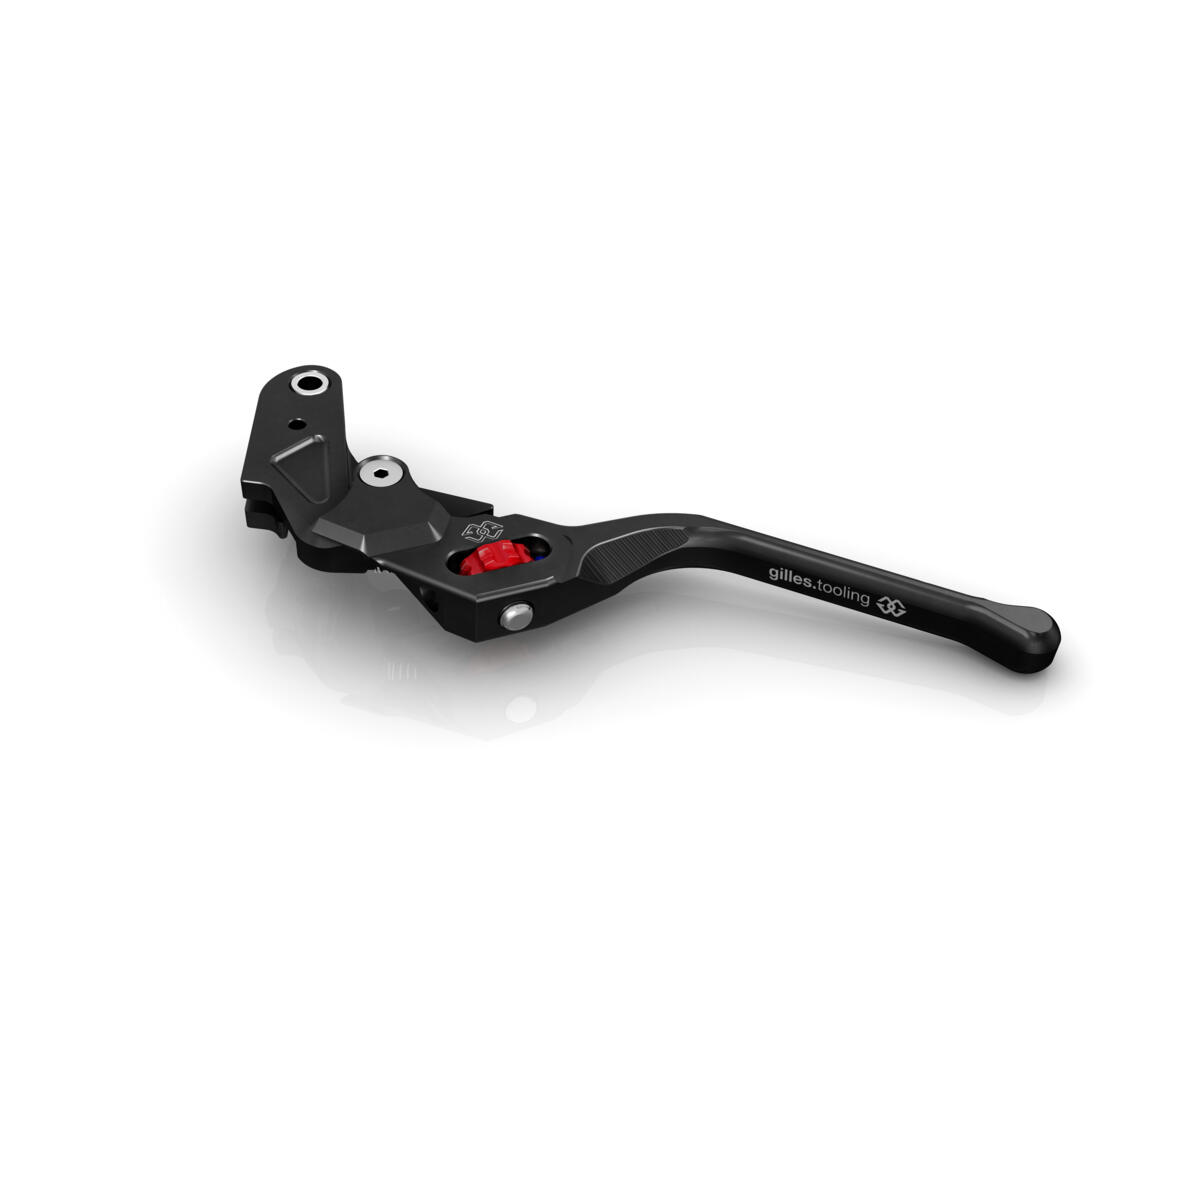 Stylish, high quality clutch lever, replacing the original.